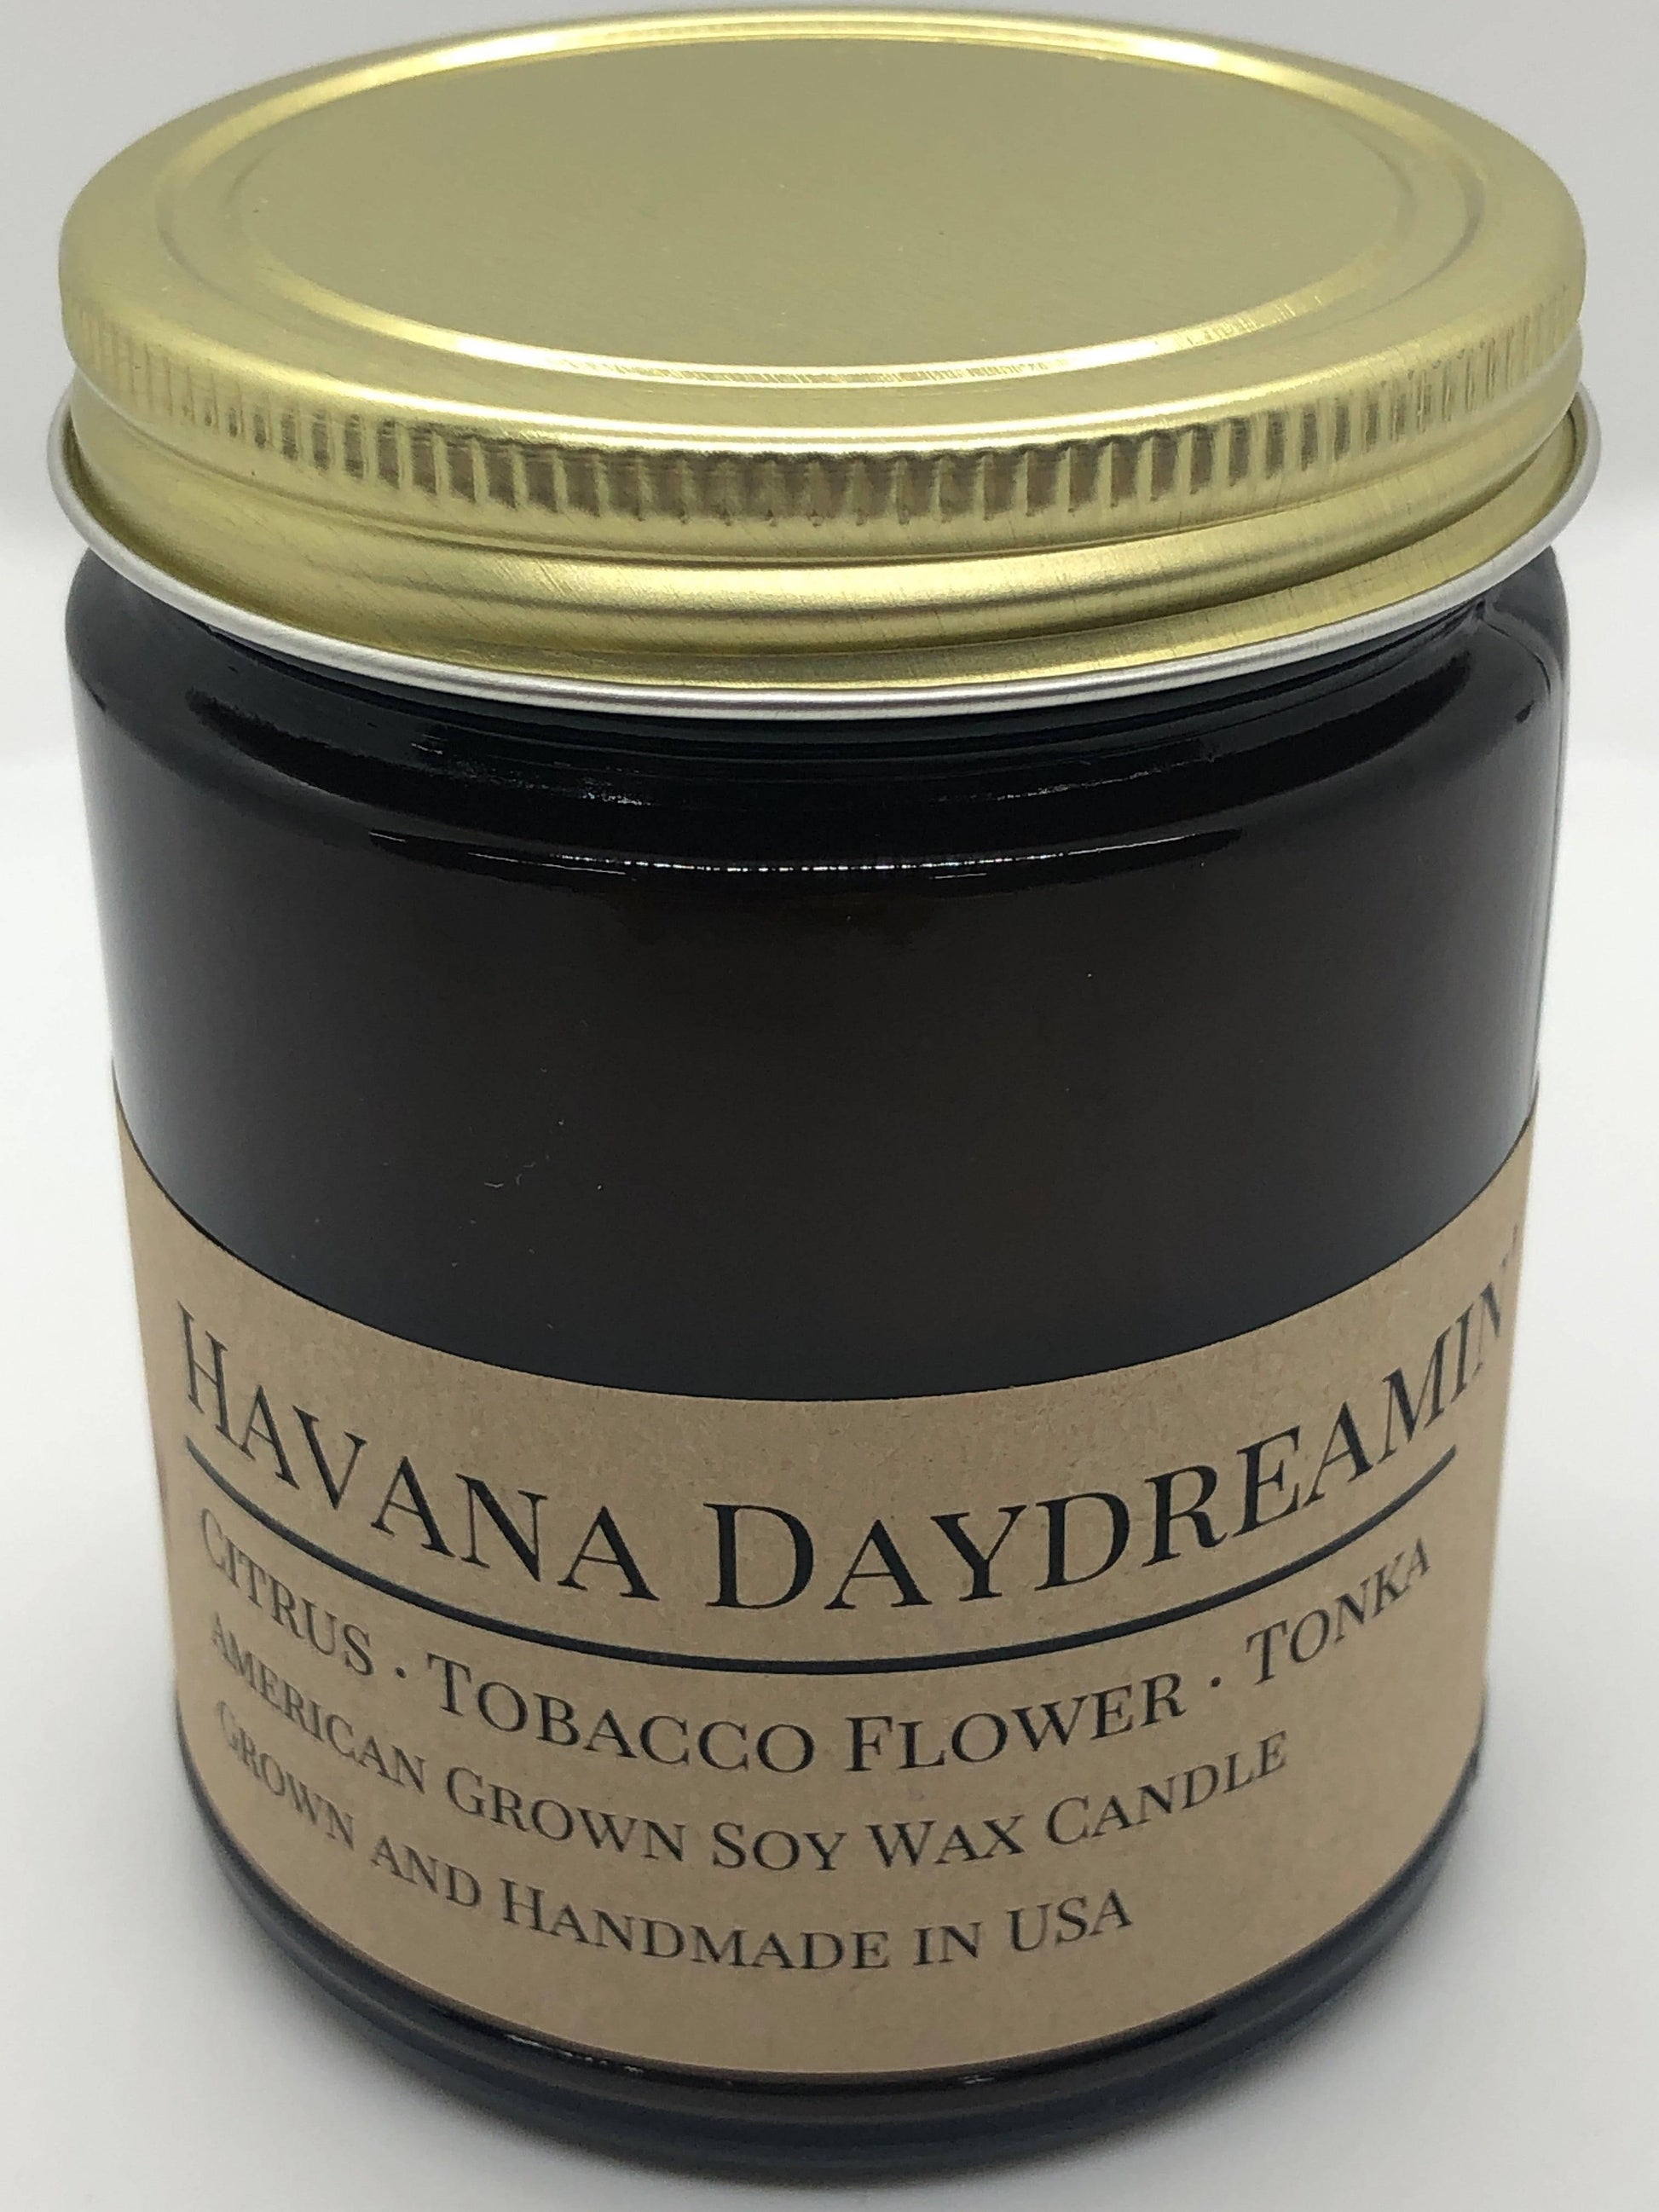 Havana Daydreamin' Soy Wax Candle | 9 oz Amber Apothecary Jar - Prairie Fire Candles